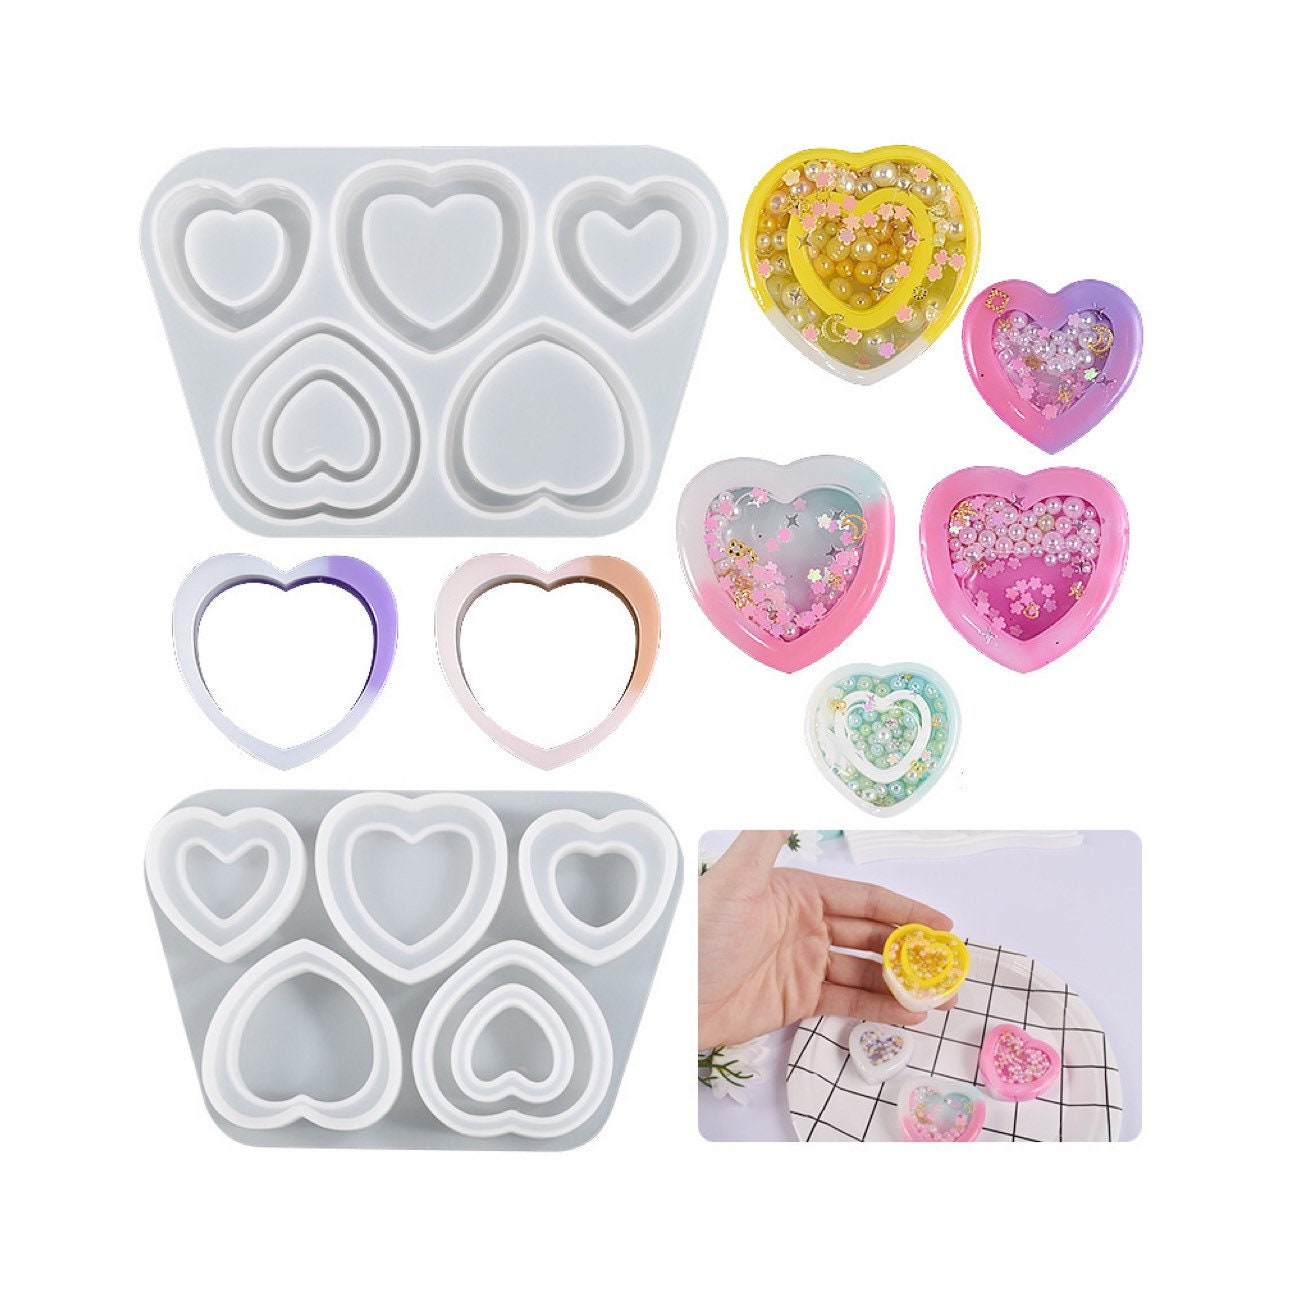 Xidmold 2pcs Resin Shaker Molds with 5 Seal Films, Quicksand Heart Shape &  Japanese Wind Chime Shape Casting Epoxy Resin Molds, Shaker Silicone Mold